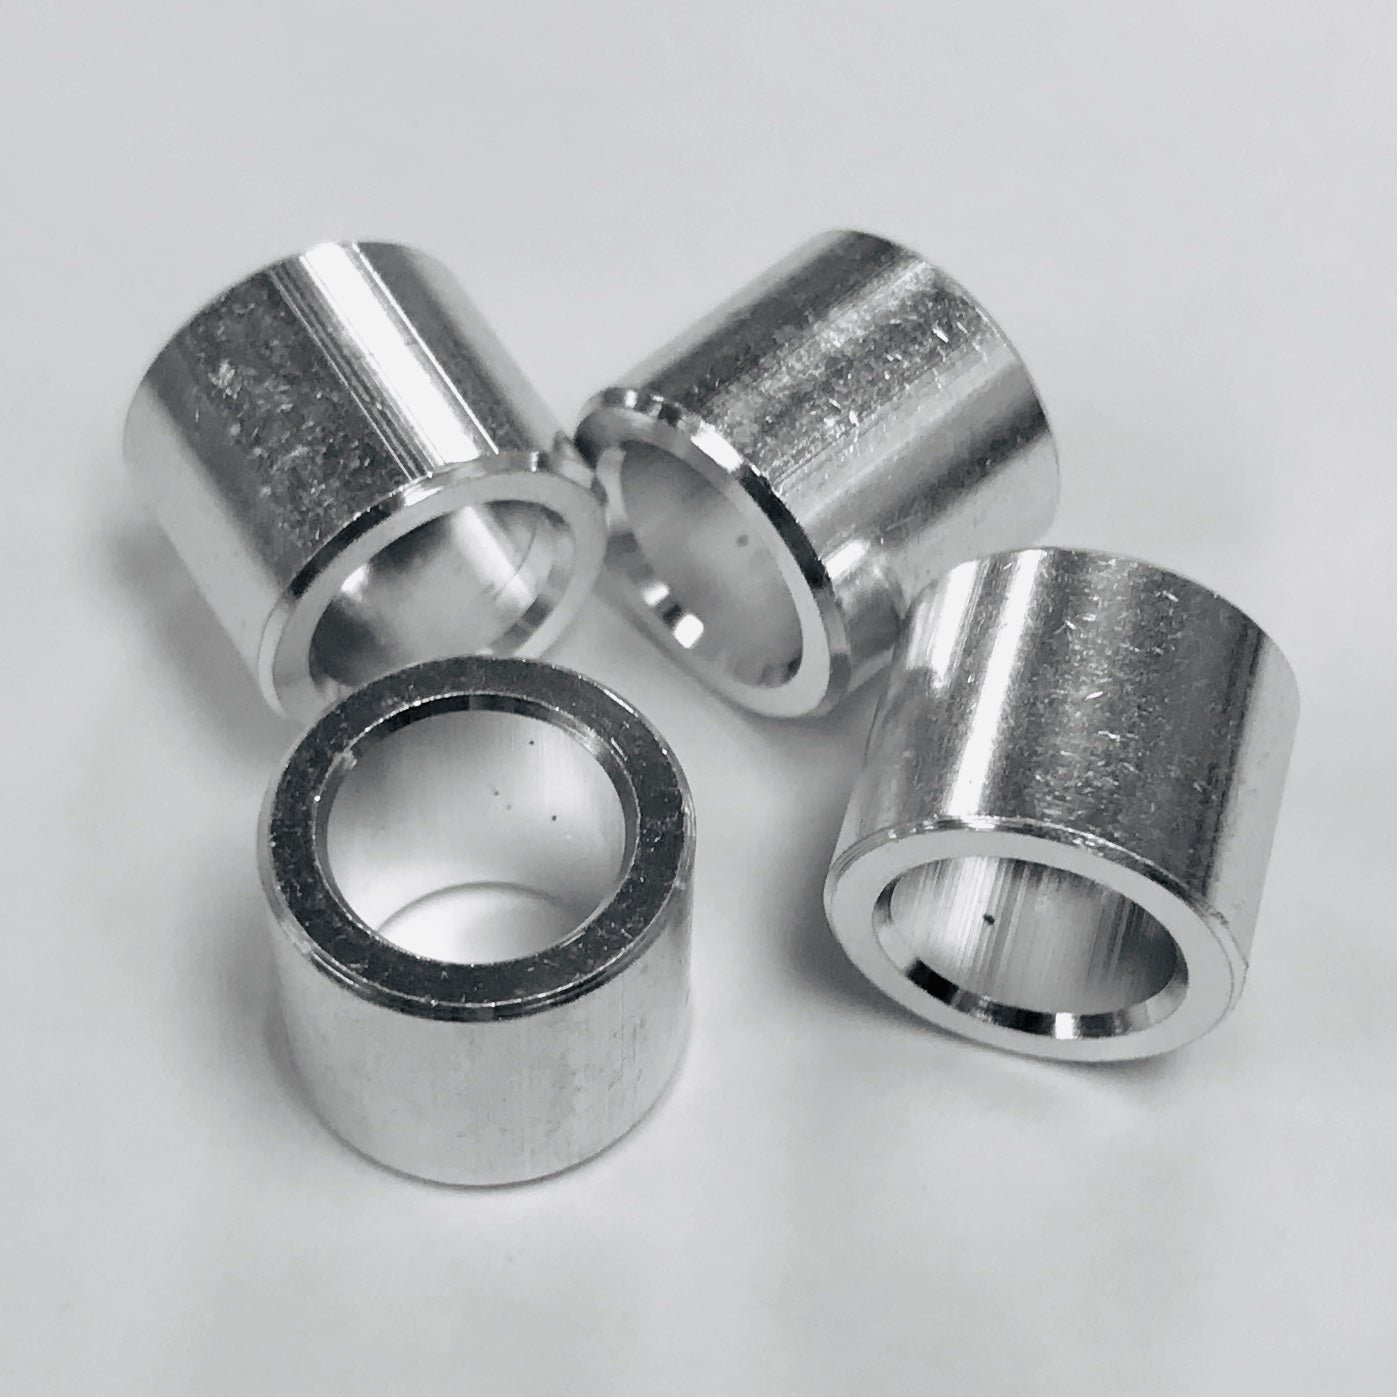 Bearing Spacers for inline wheels